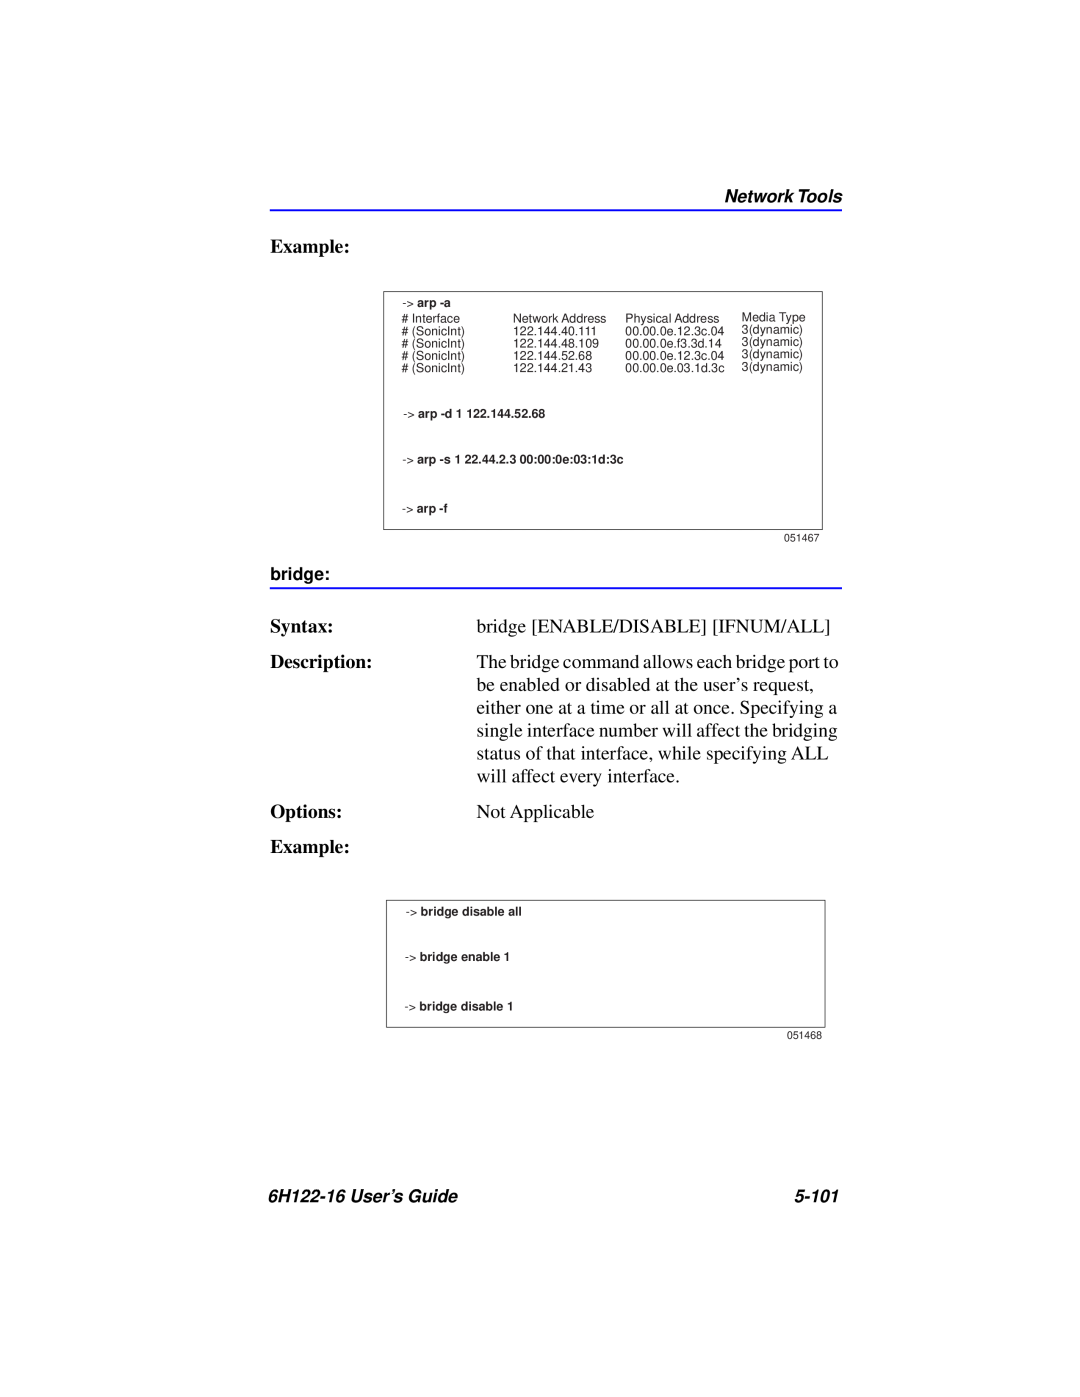 Cabletron Systems 6H122-16 manual Example, Syntax, Description, Options 